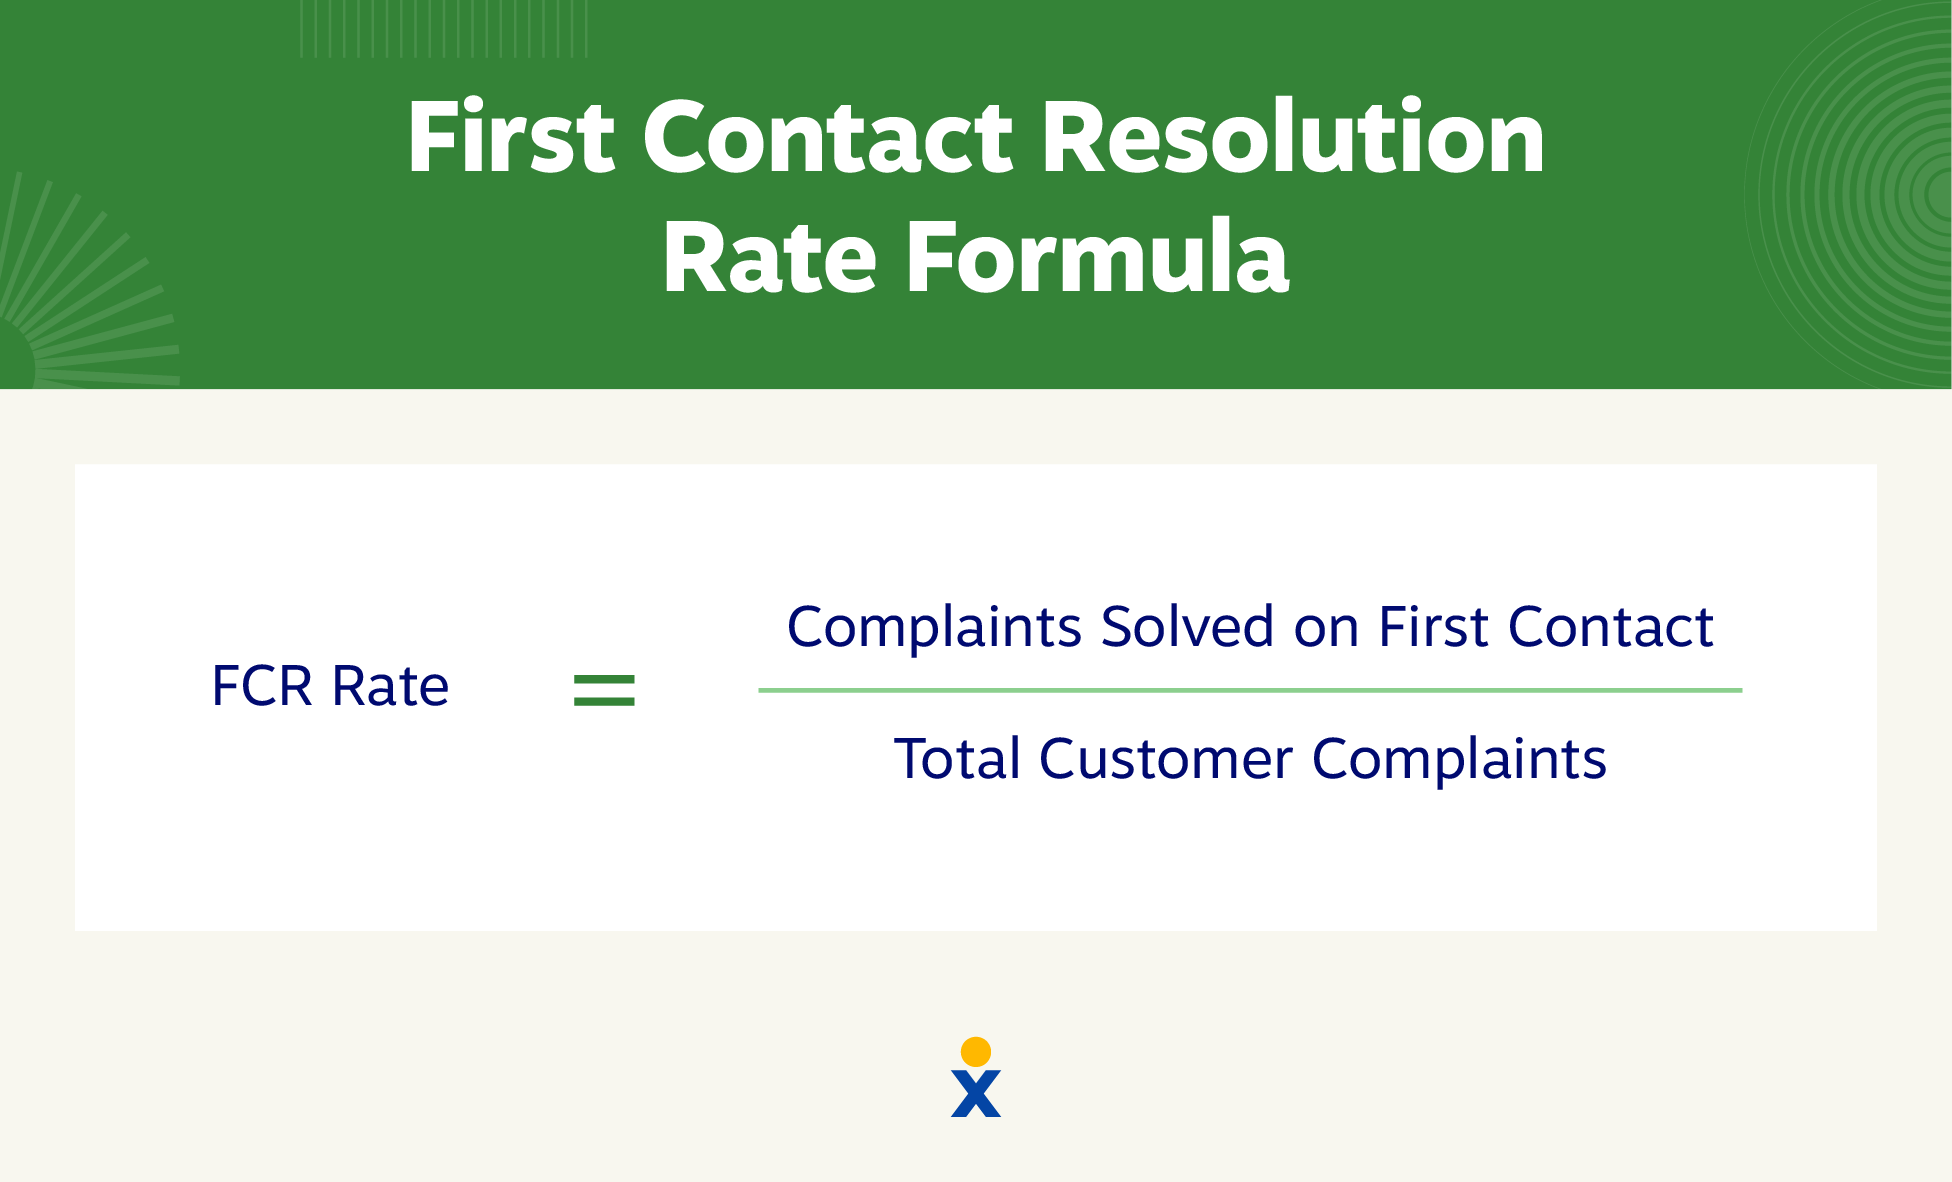 First contact resolution rate formula